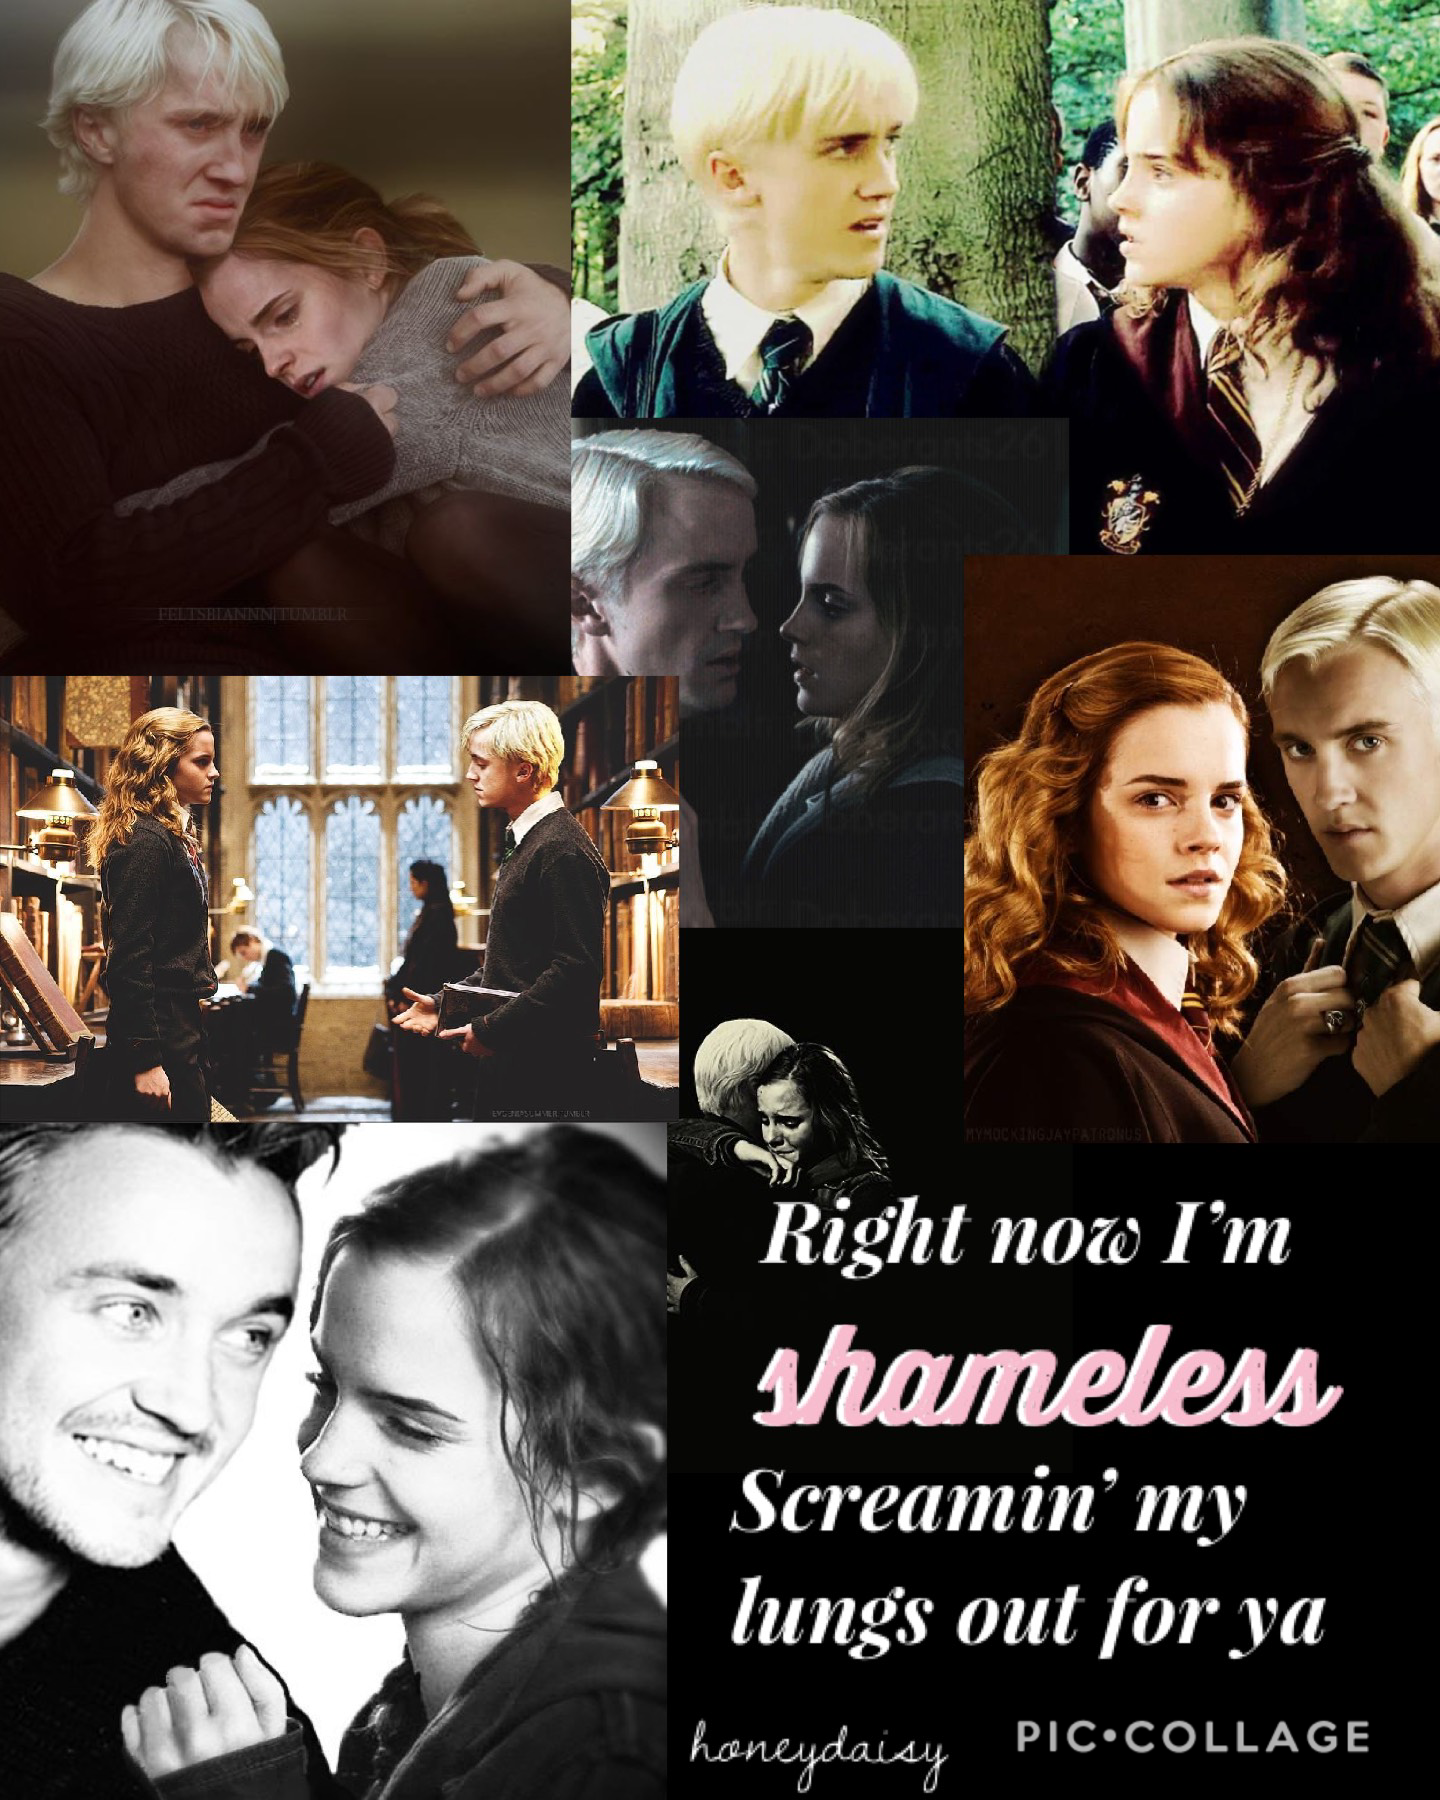 Camila Cabello Shameless!⬇️
here is my dramione tribute! as soon as i head this song i thought of dramione!💖